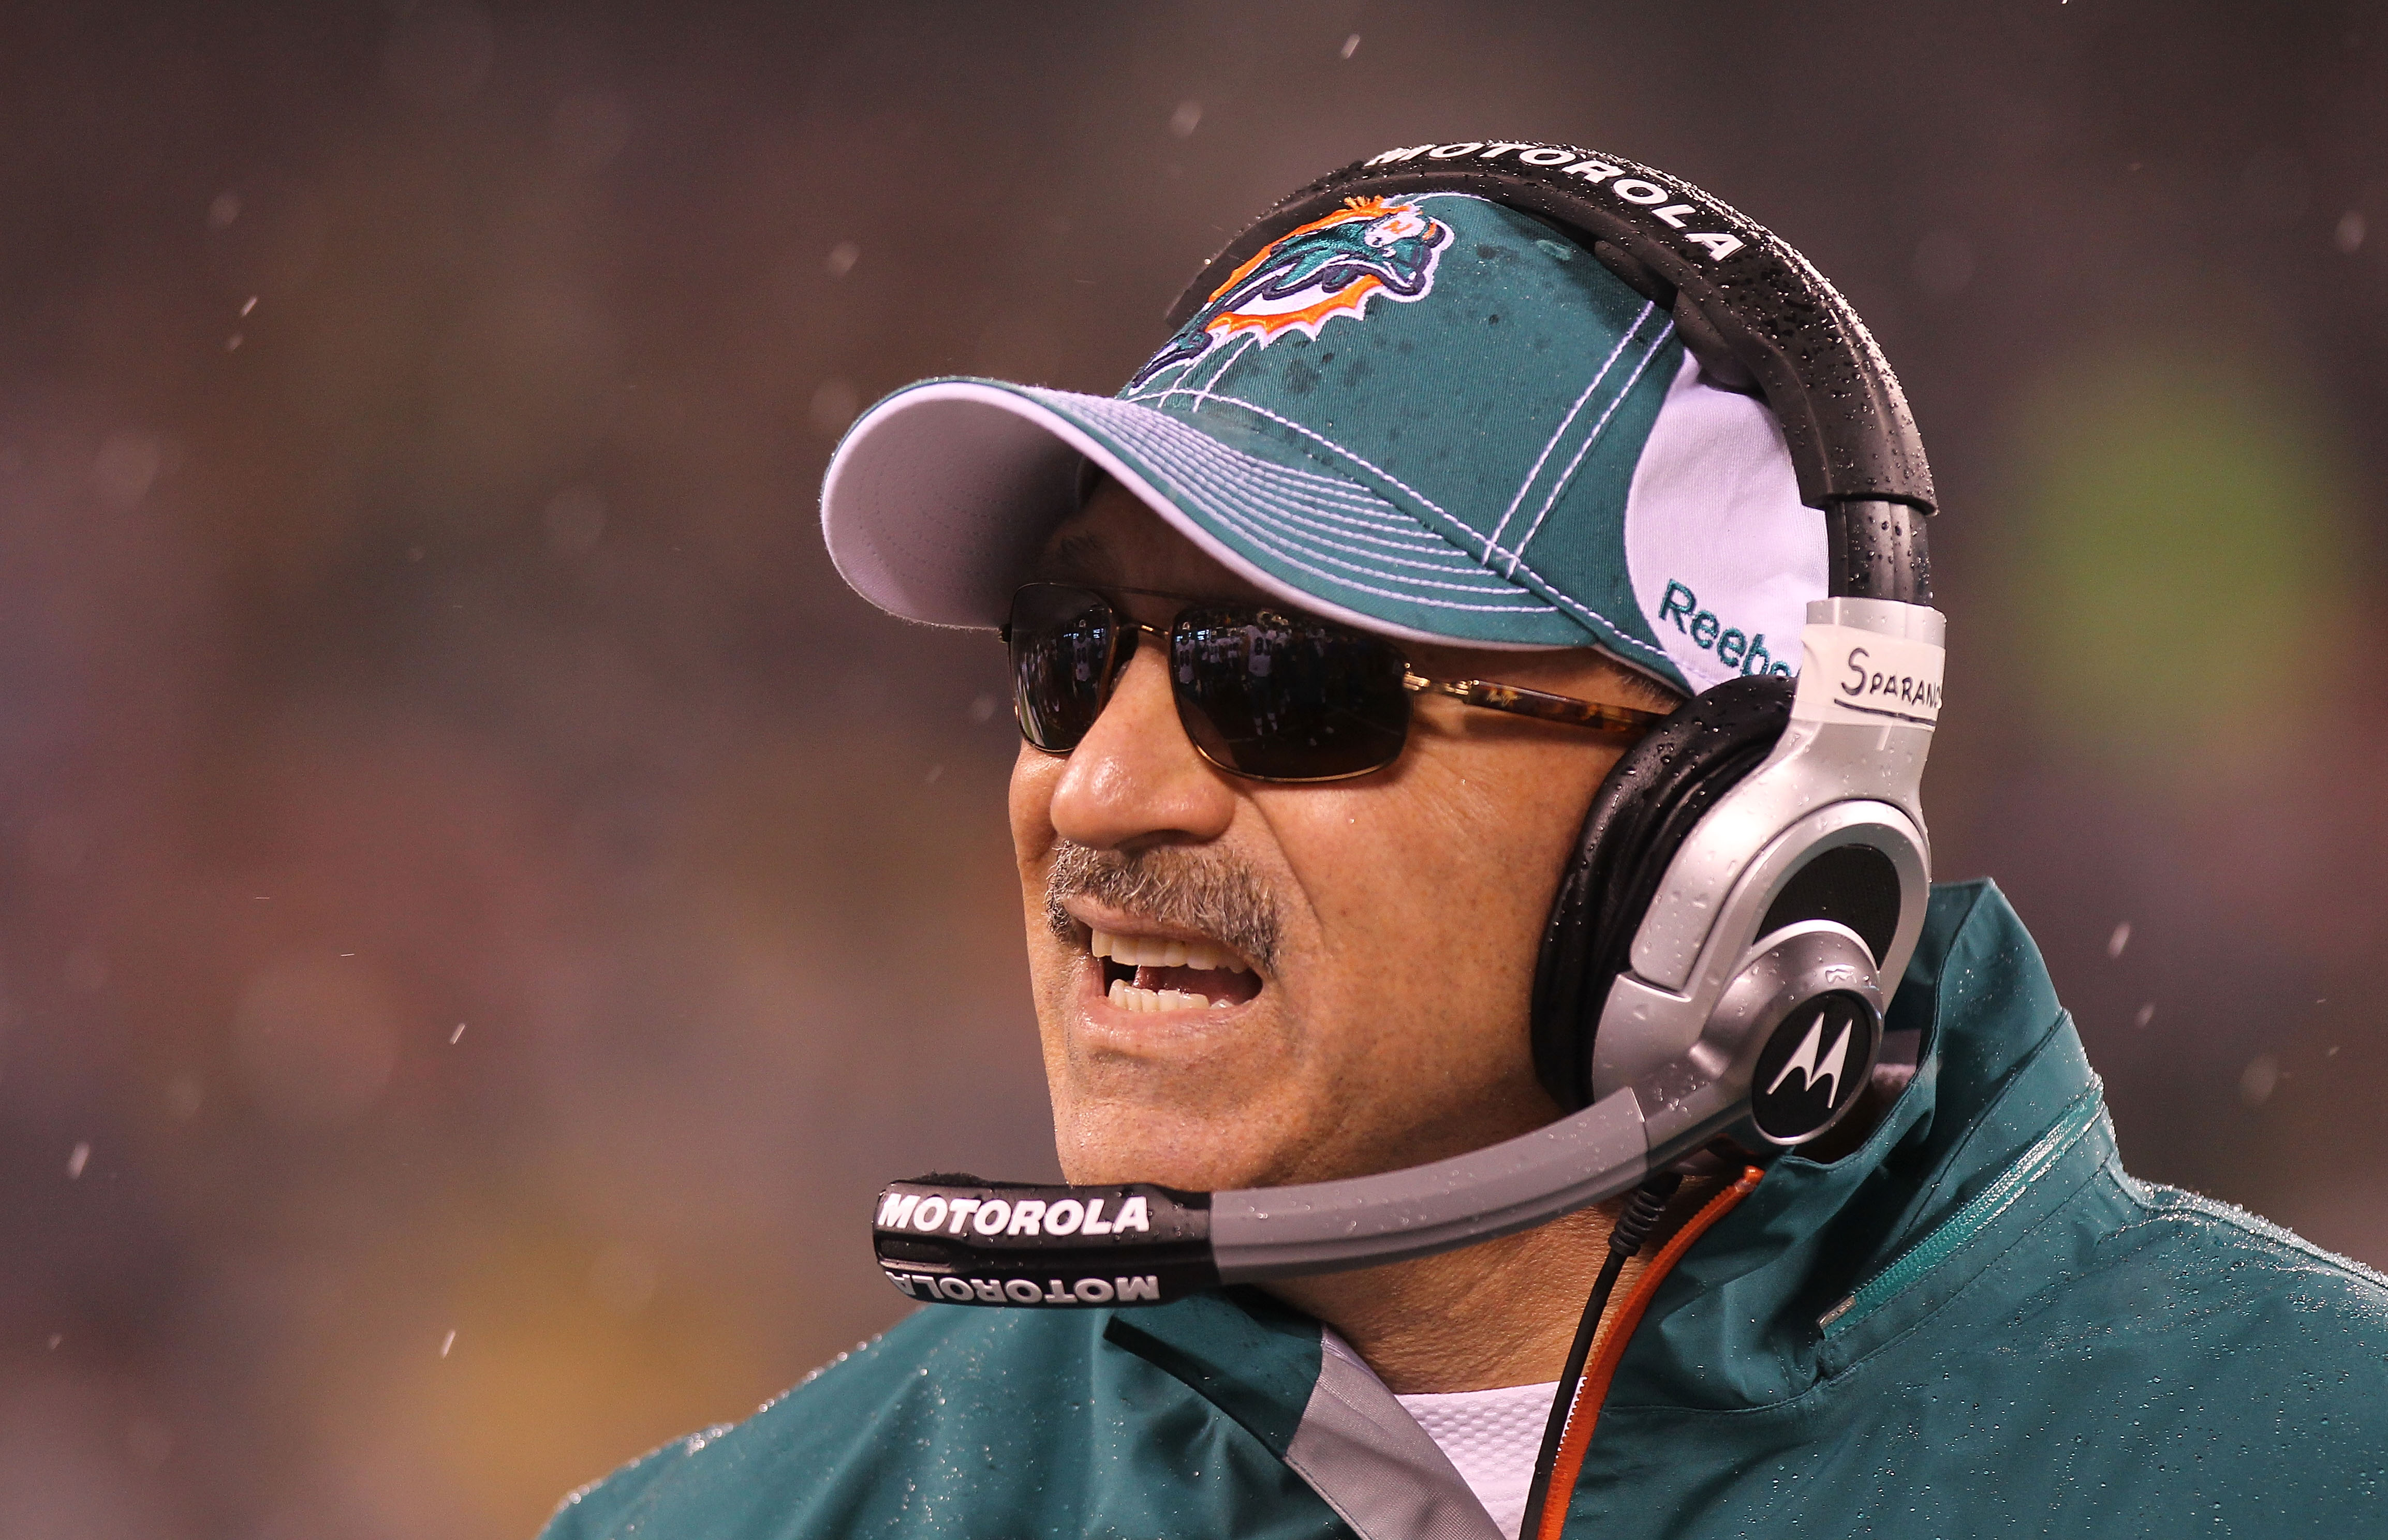 Ex-Dolphins coach Tony Sparano named Jets offensive coordinator 